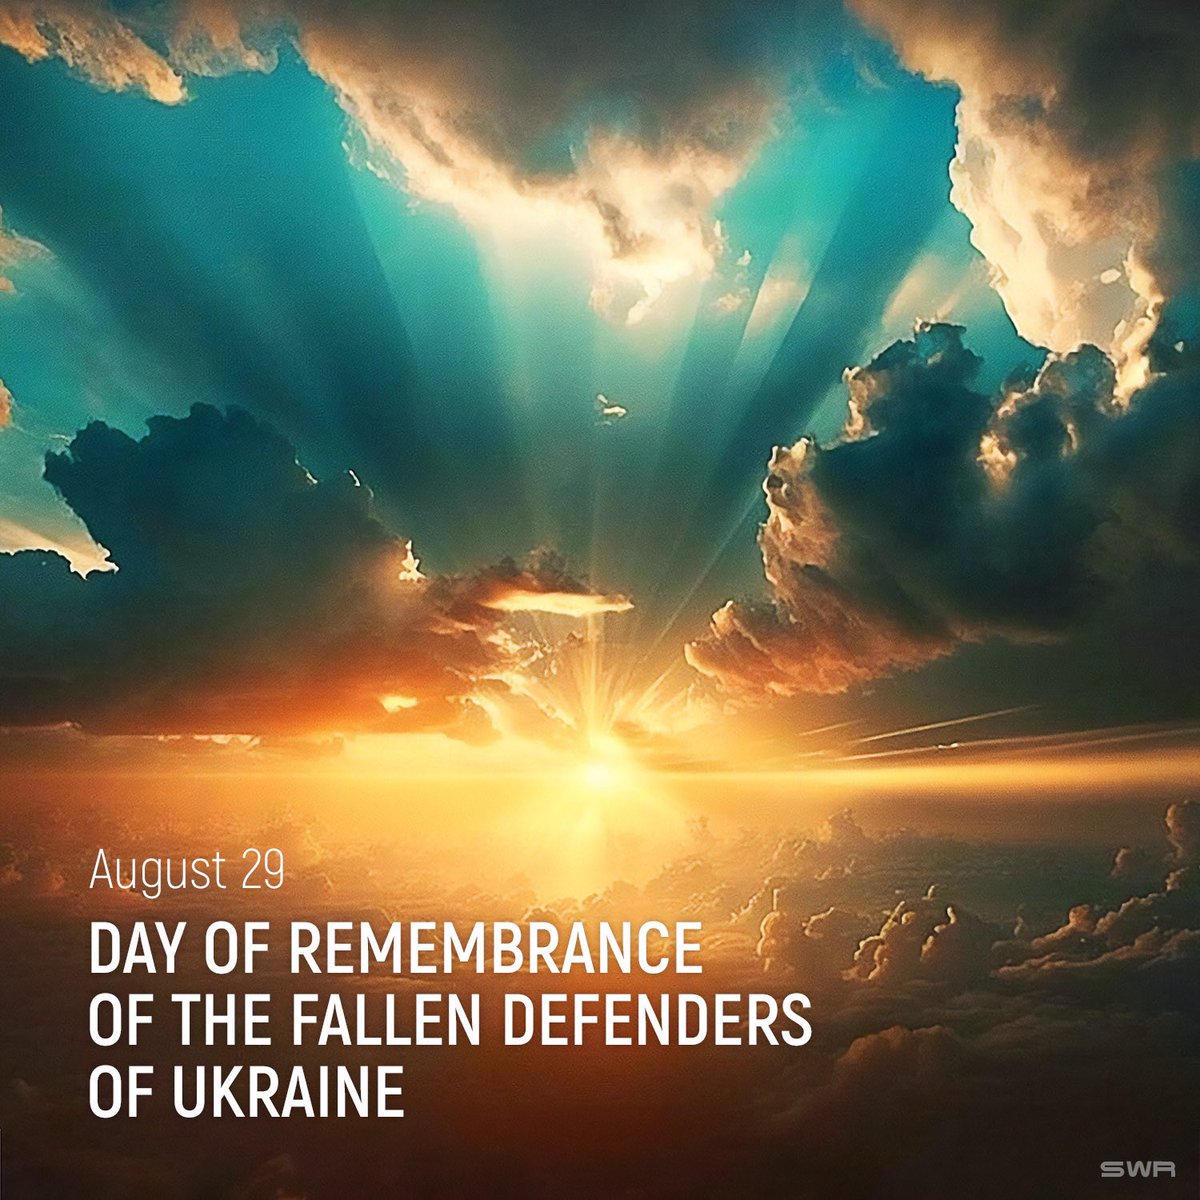 Today in Ukraine, it's the Day of Remembrance of the Fallen Defenders of Ukraine. On this day, we remember the soldiers who gave their lives in the war with russia. The war for freedom. The war for the survival of our people and our state. They gave us time to build a new army